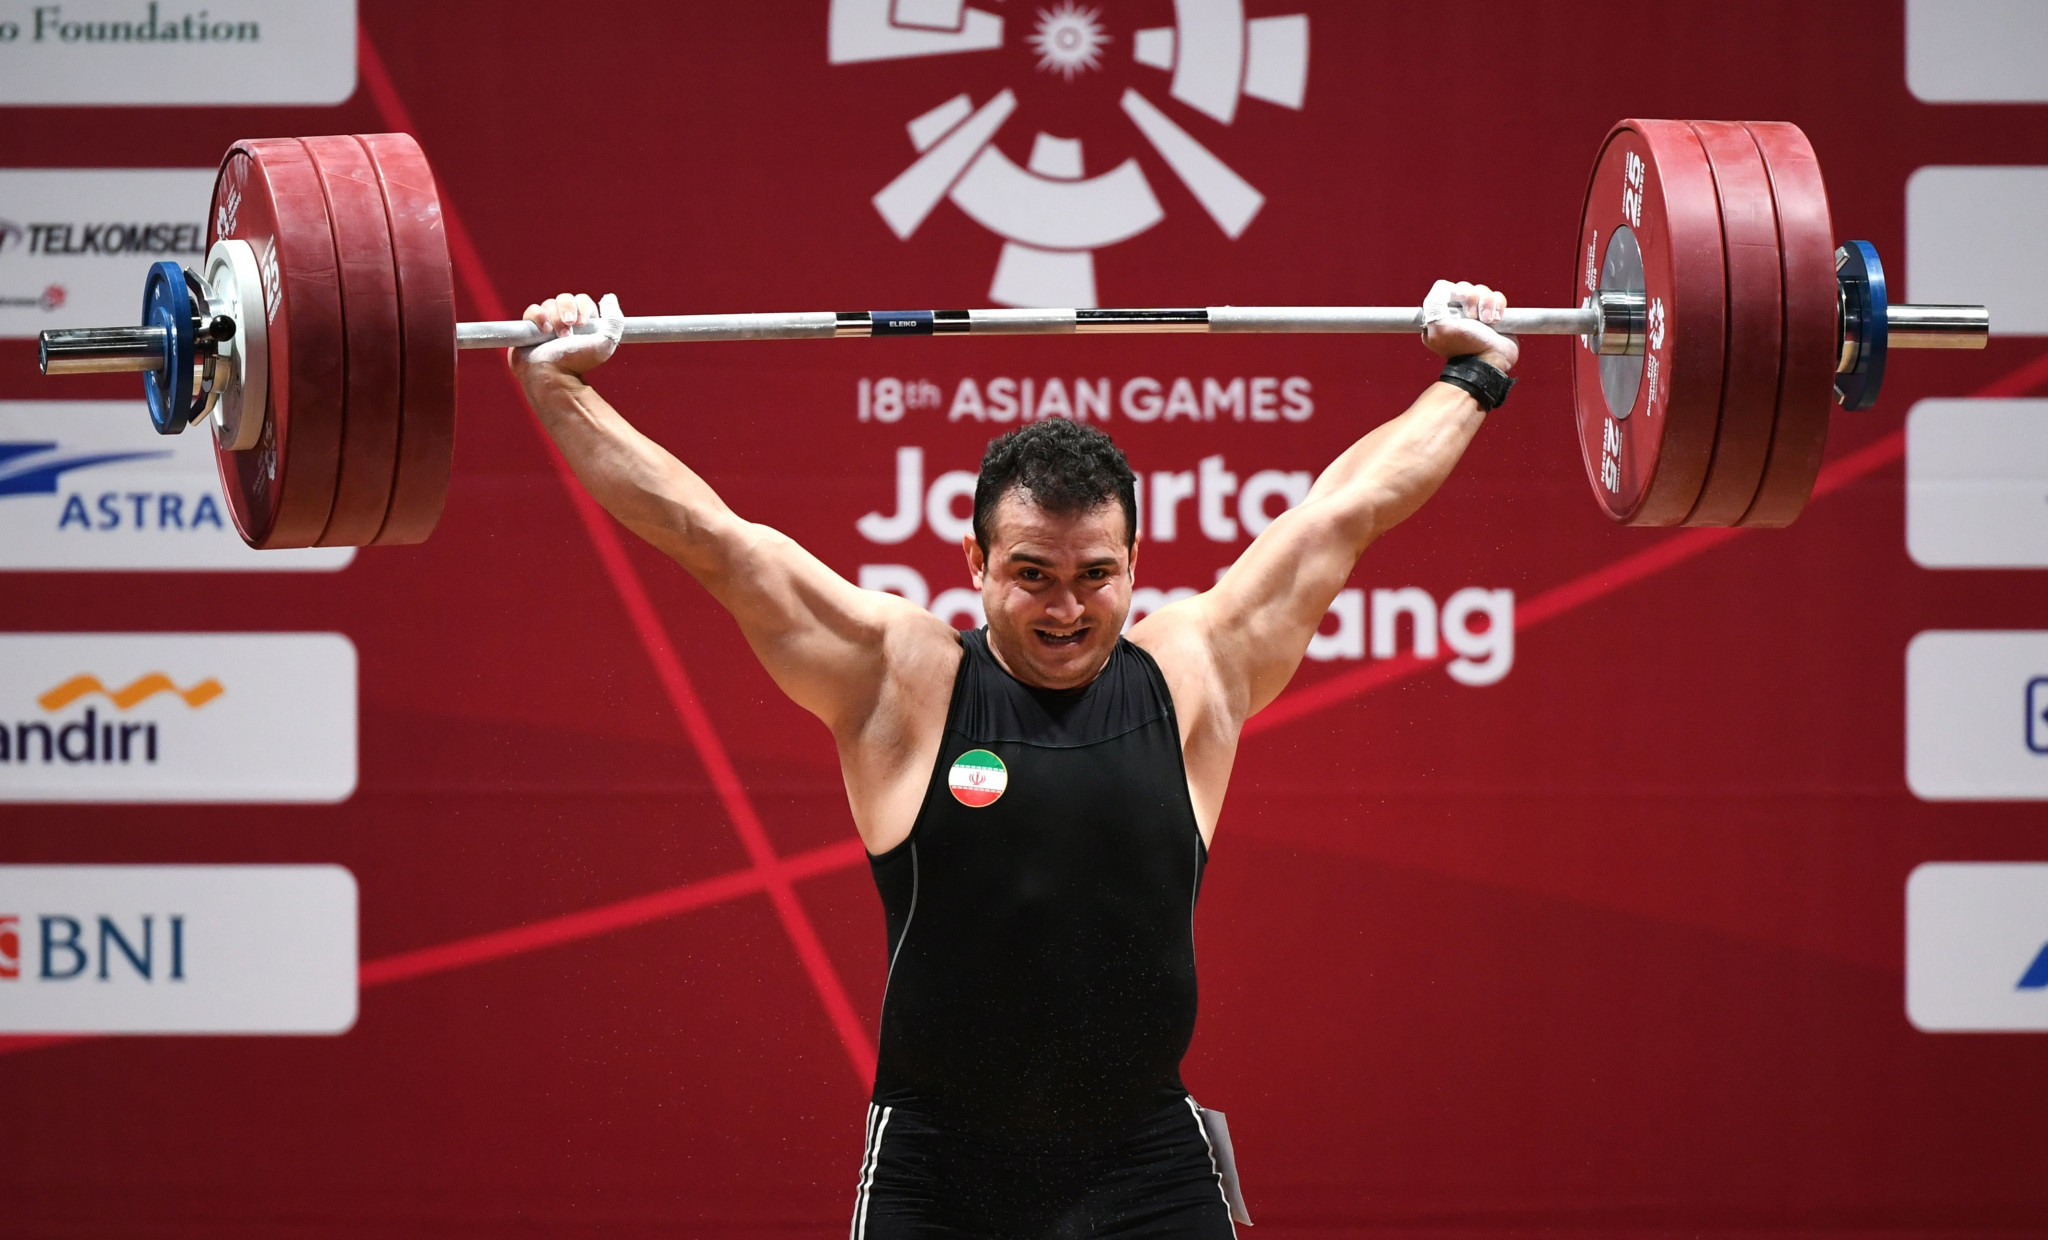 Iran's Sohrab Moradi broke a 19-year-old snatch world record on his way to winning the men's 94 kilograms weightlifting gold medal ©Getty Images